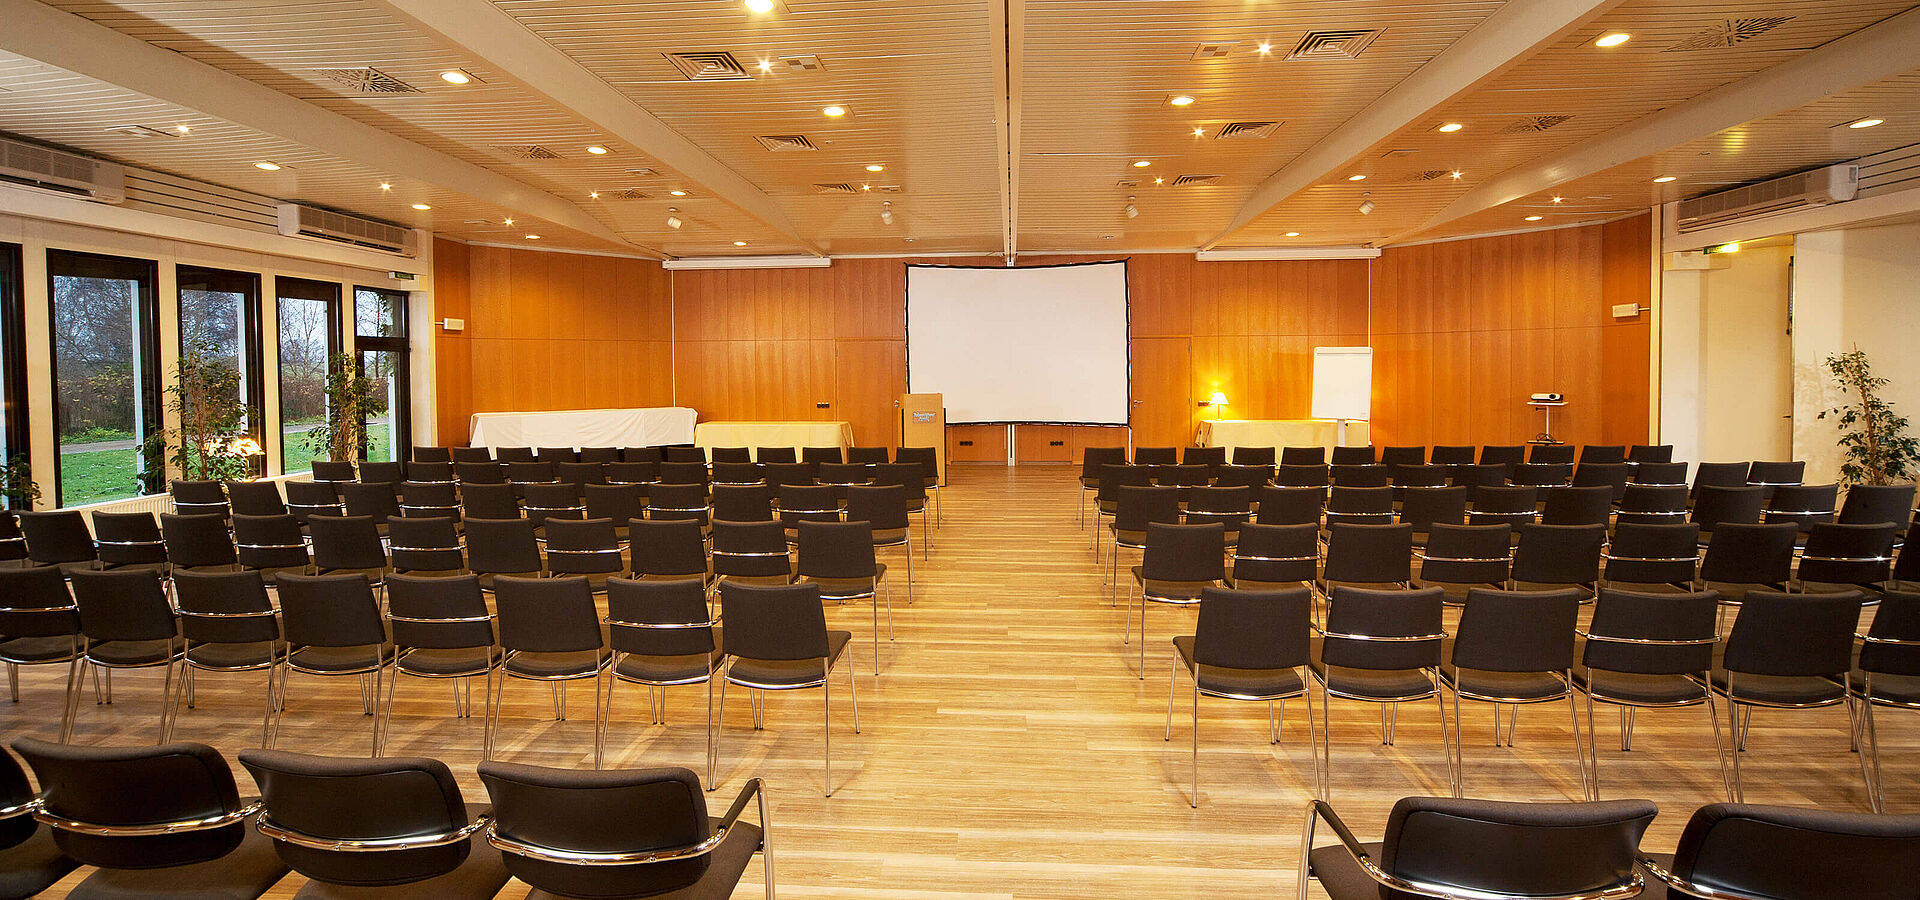 Conferences – flat rates for day guests